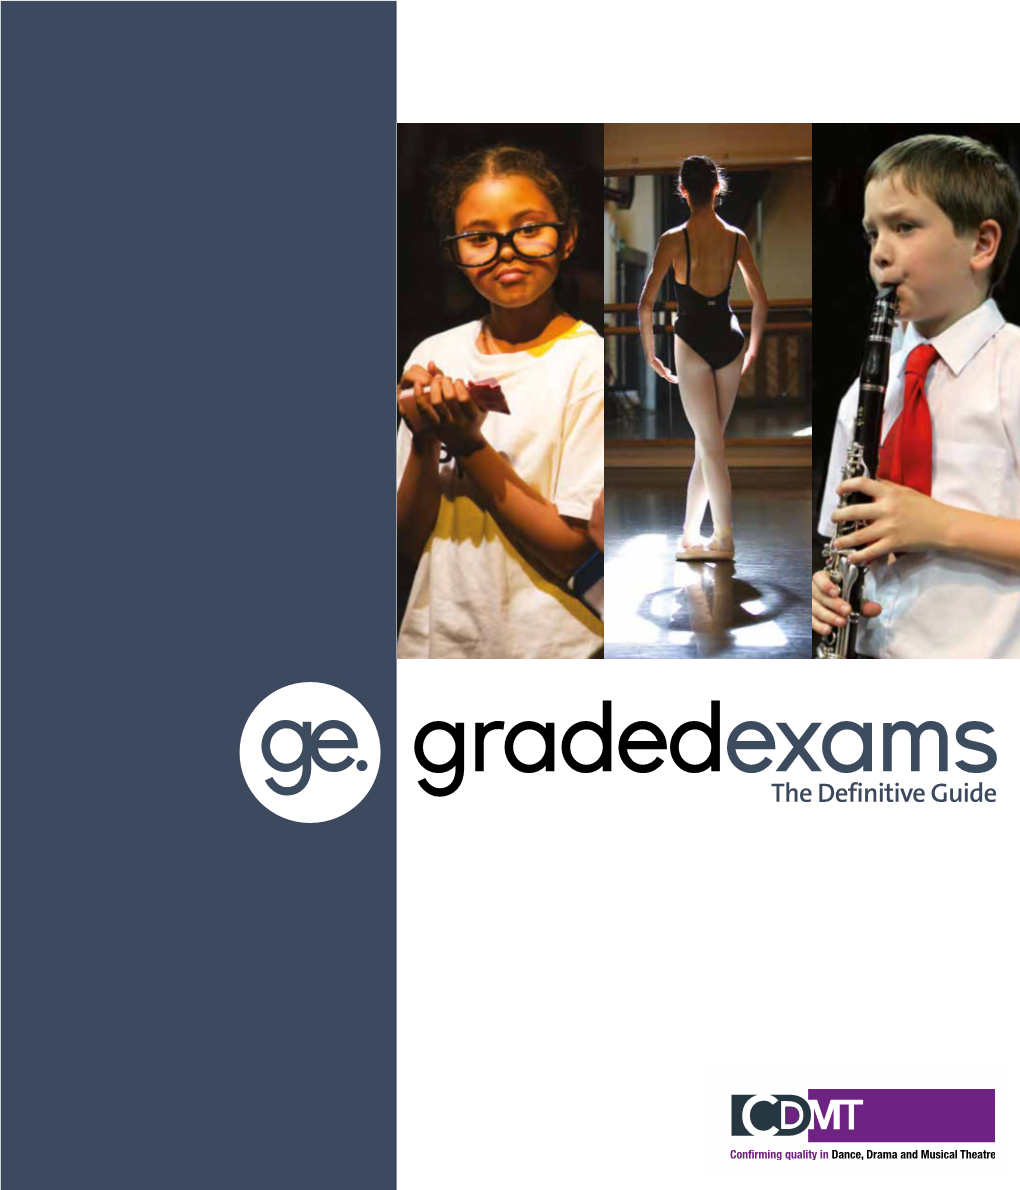 The Definitive Guide Graded Exams V6.Qxp Layout 1 06/05/2014 17:07 Page 2